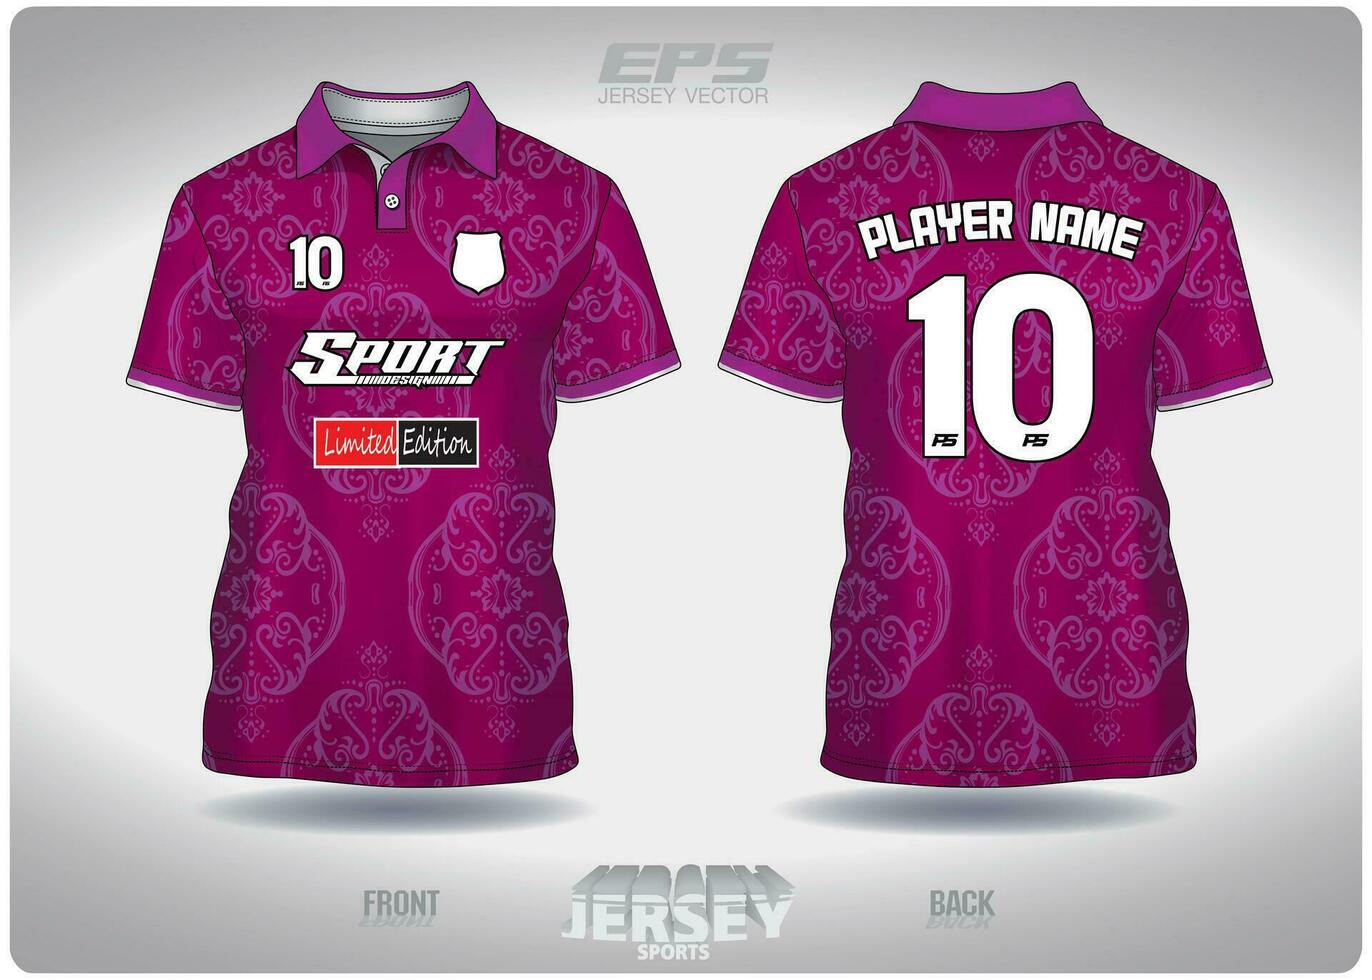 EPS jersey sports shirt vector.pink purple angel wings pattern design, illustration, textile background for sports poloshirt, football jersey poloshirt vector